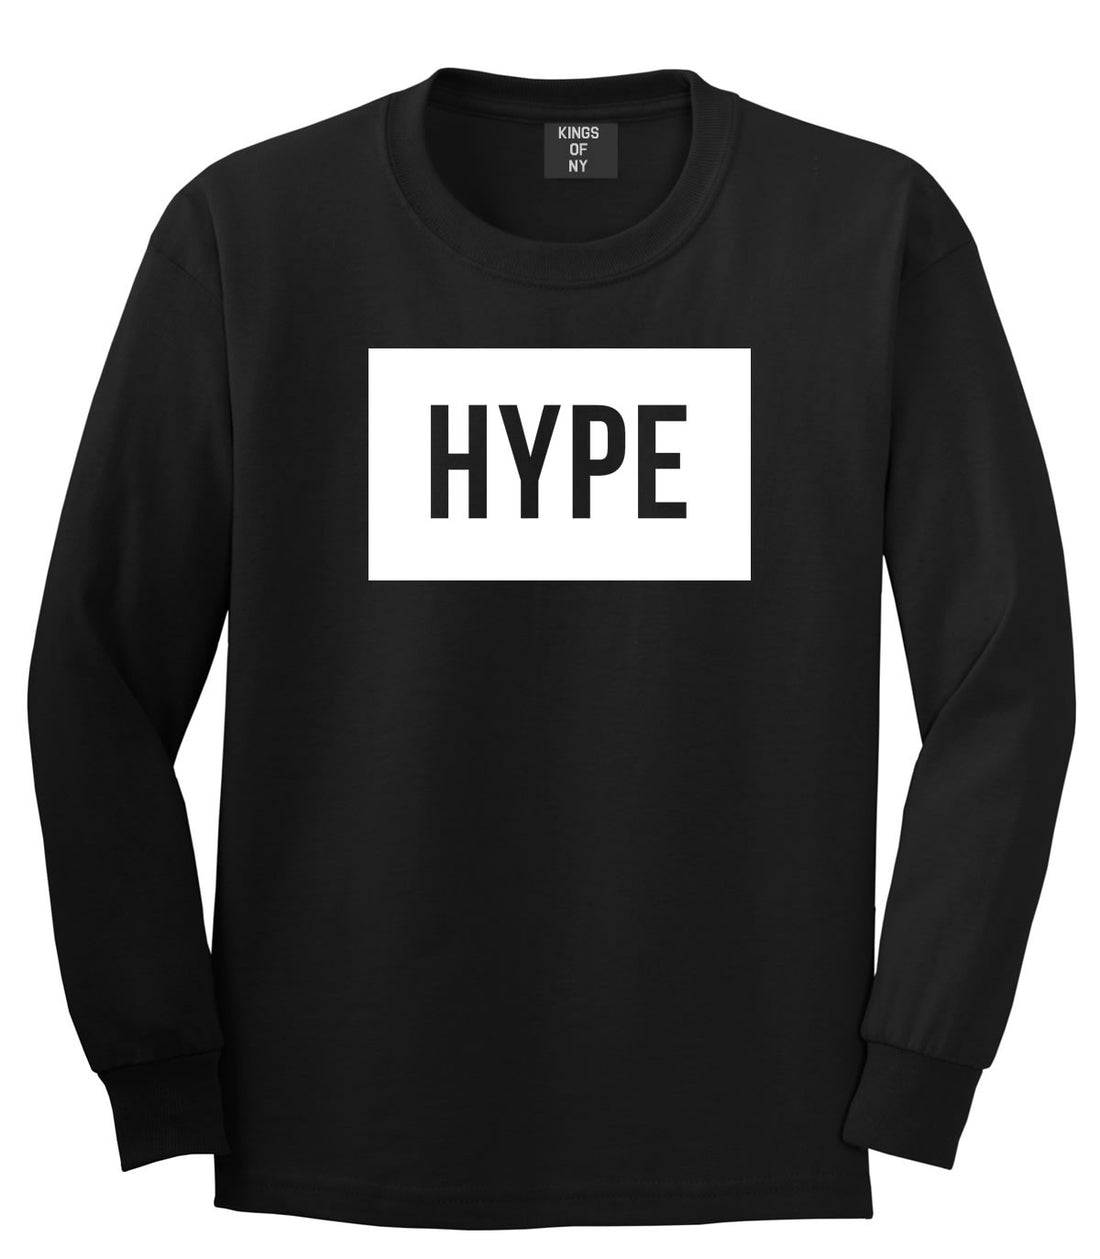 Hype Style Streetwear Brand Logo White by Kings Of NY Long Sleeve T-Shirt In Black by Kings Of NY